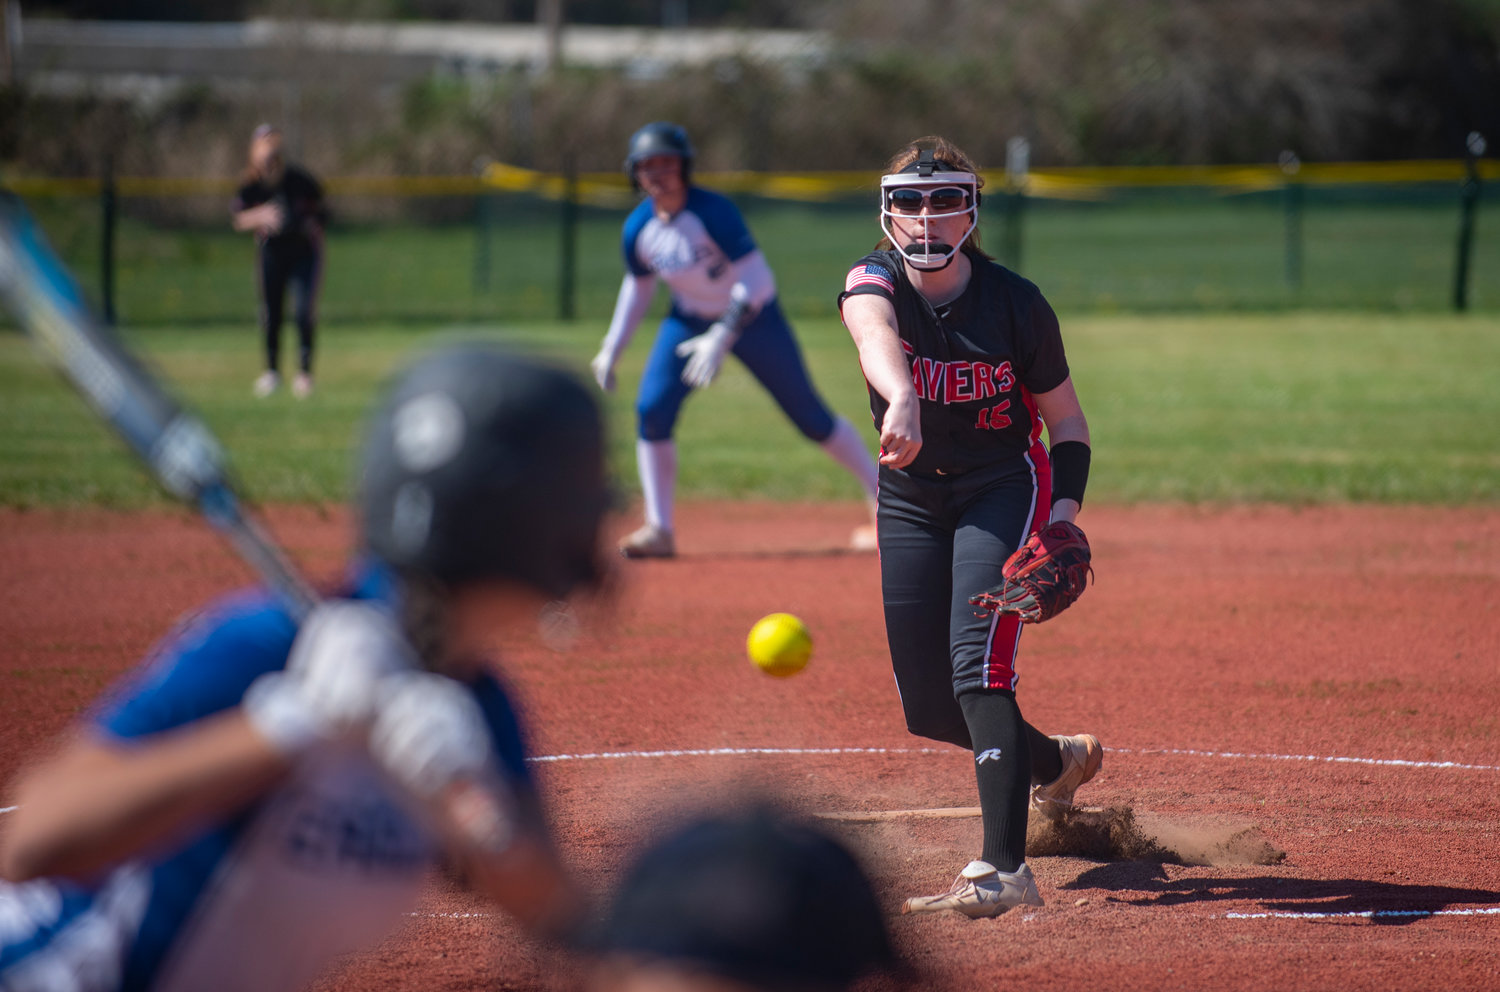 Tenino ace Emily Baxter whips a pitch to an Elma batter during Senior Night on Tuesday.